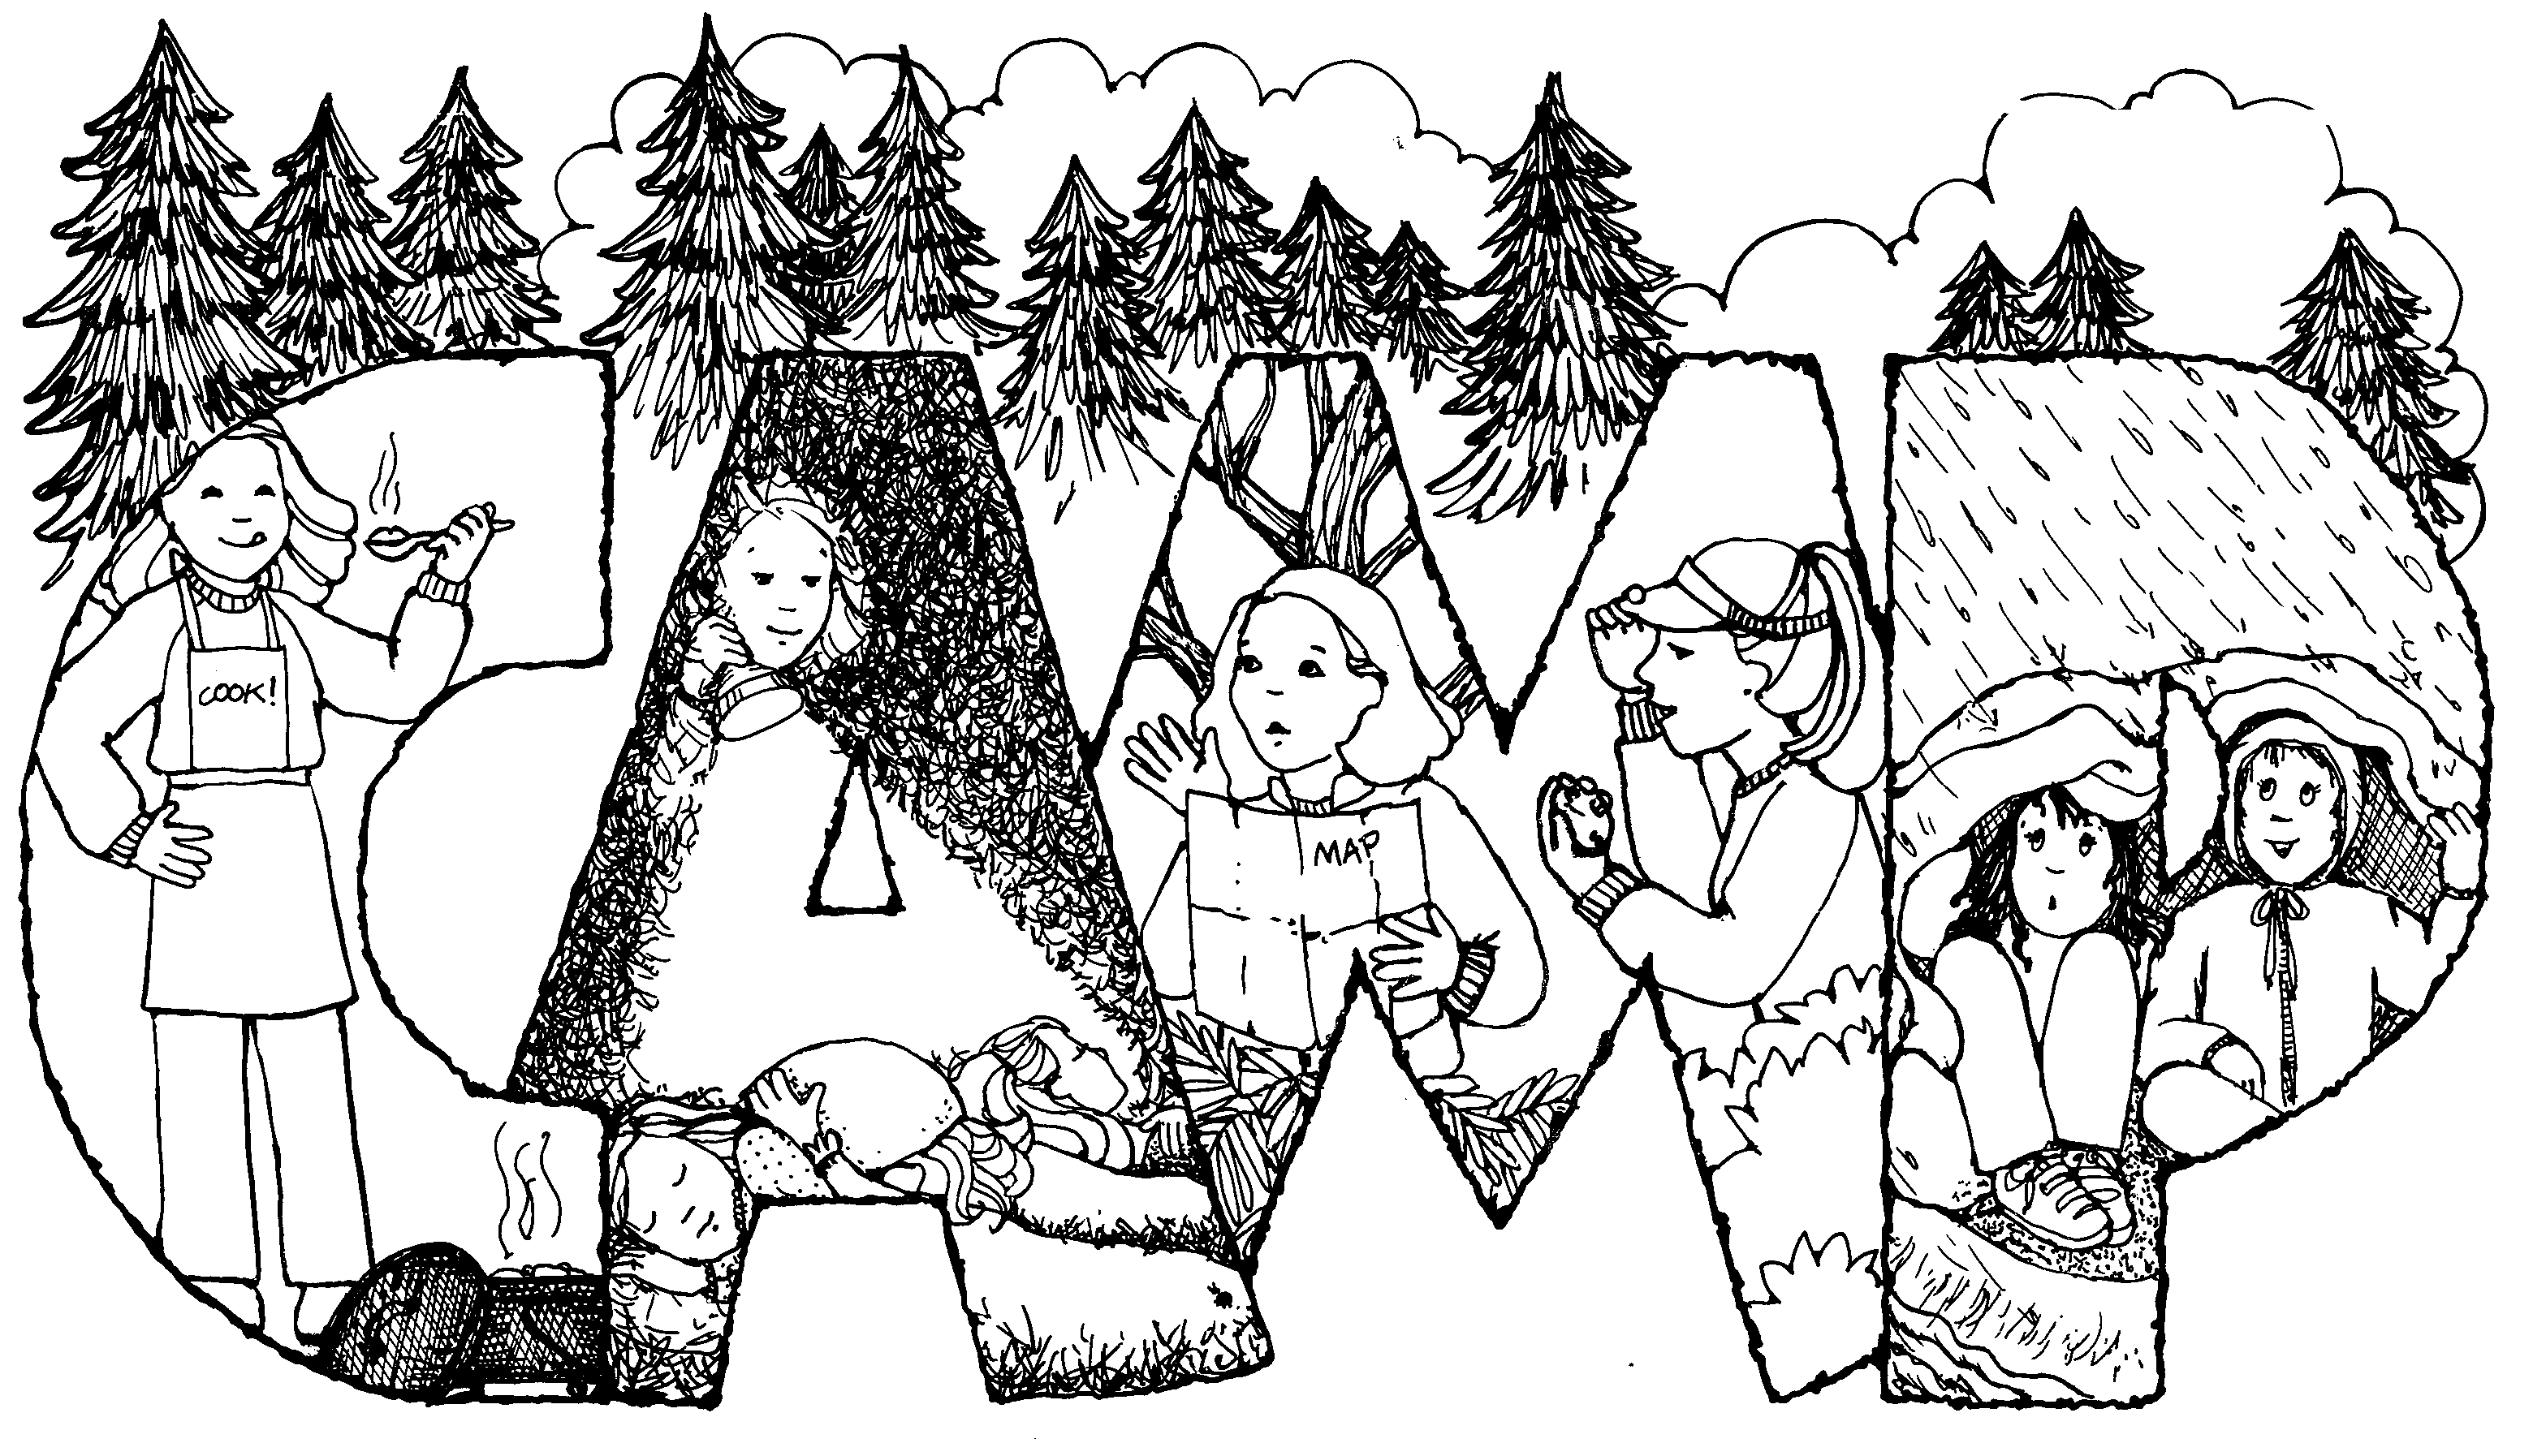 Summer camp clipart black and white